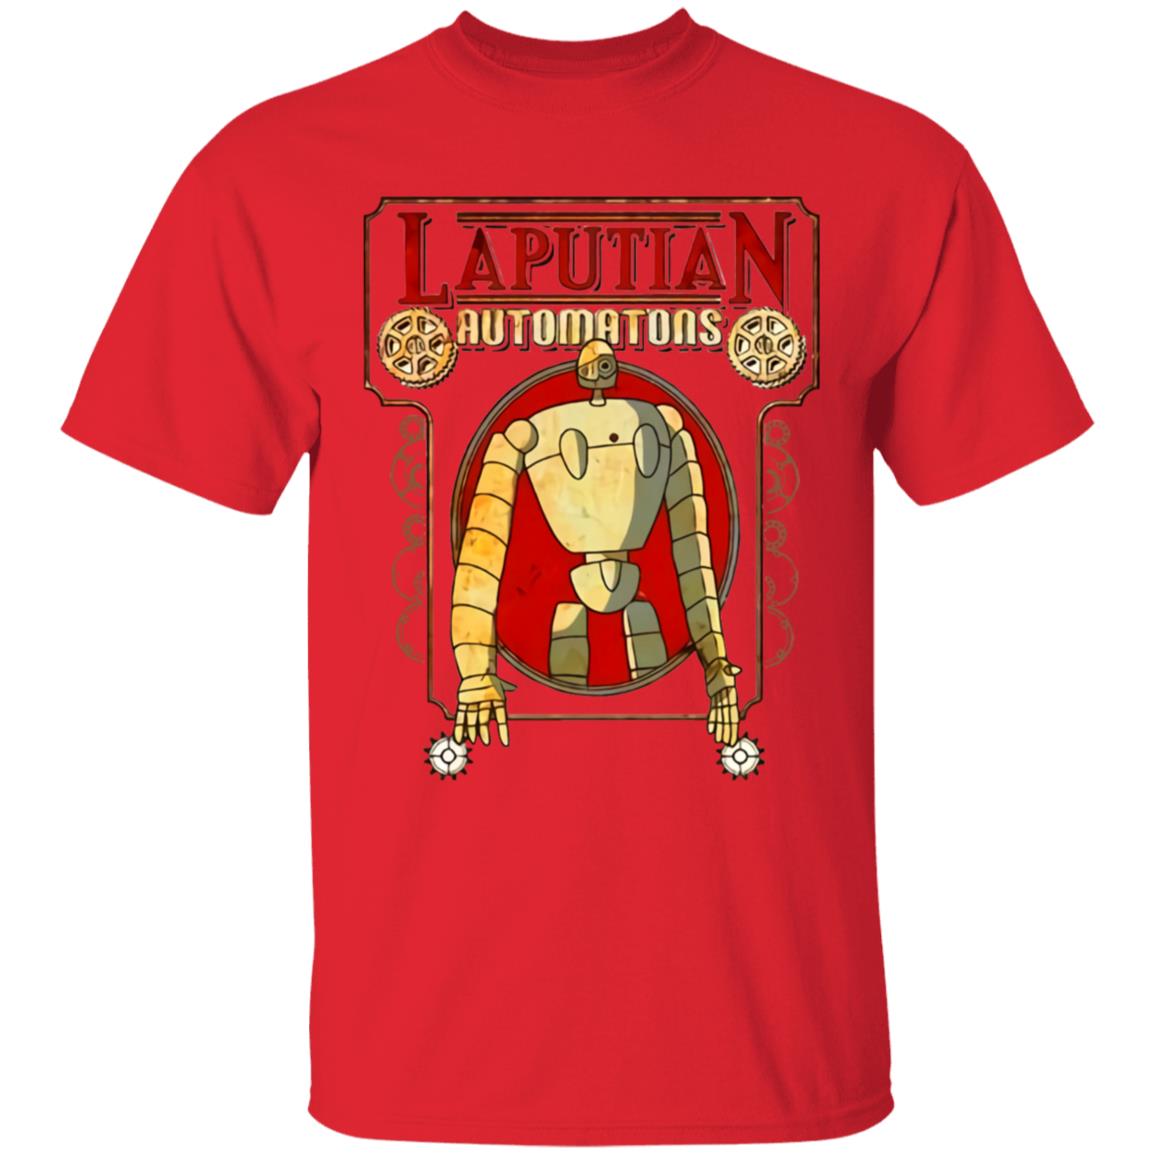 Laputa: Castle in the Sky Robot Style 2 T Shirt for Kid Ghibli Store ghibli.store